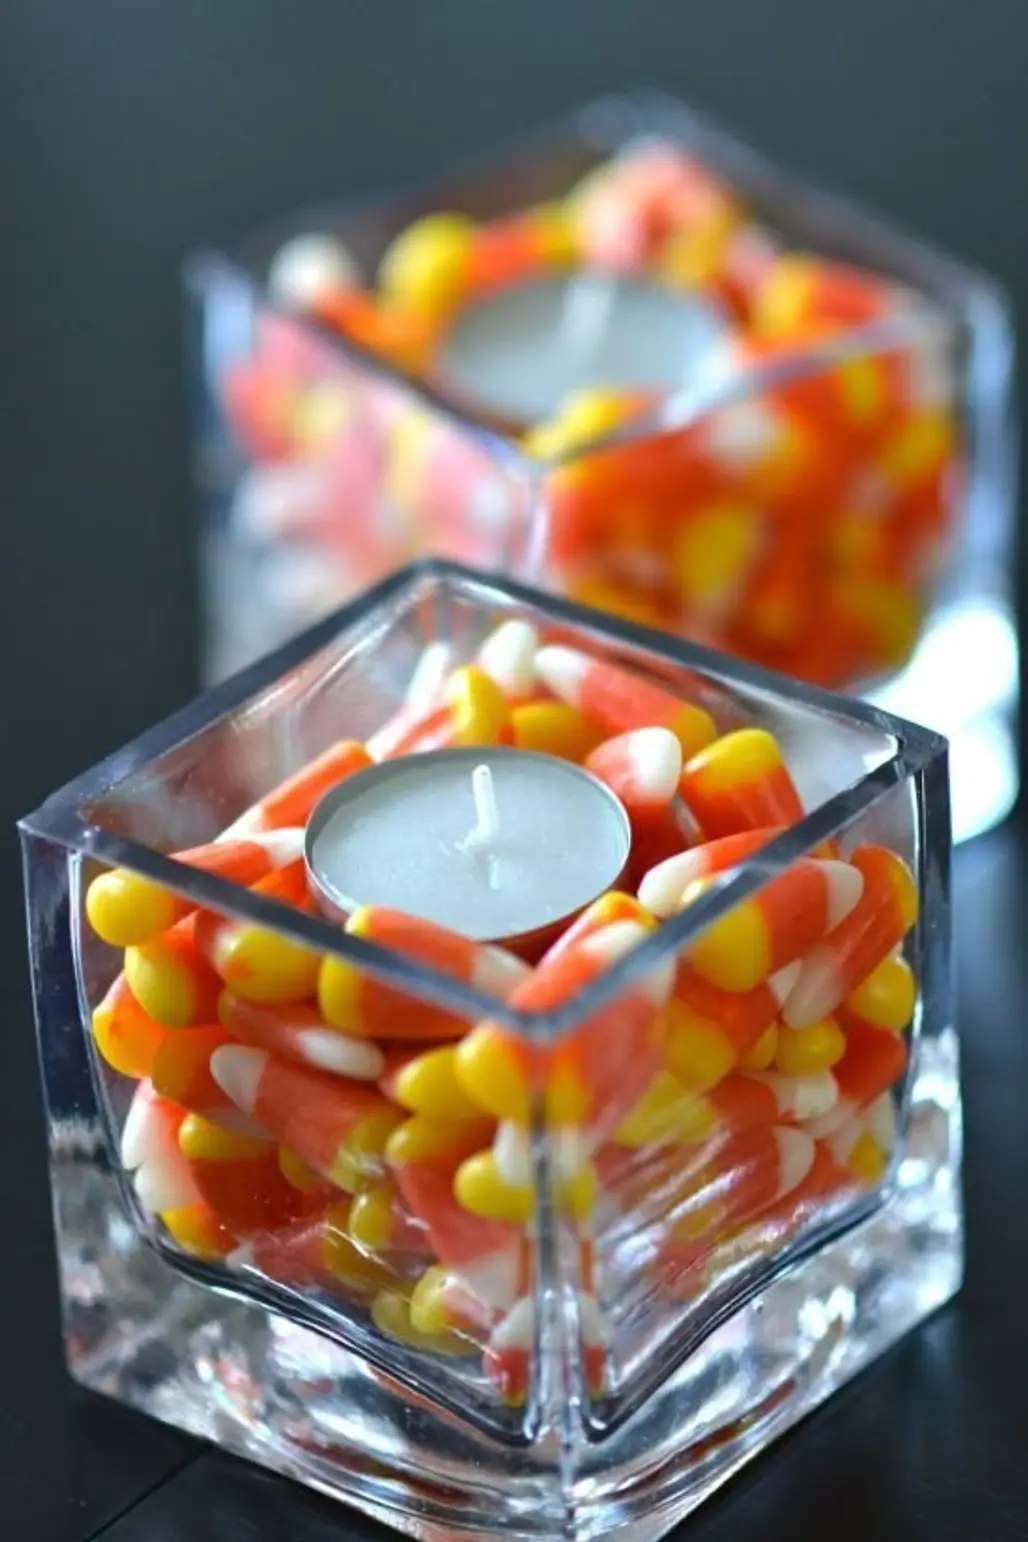 Candy Corn Candle